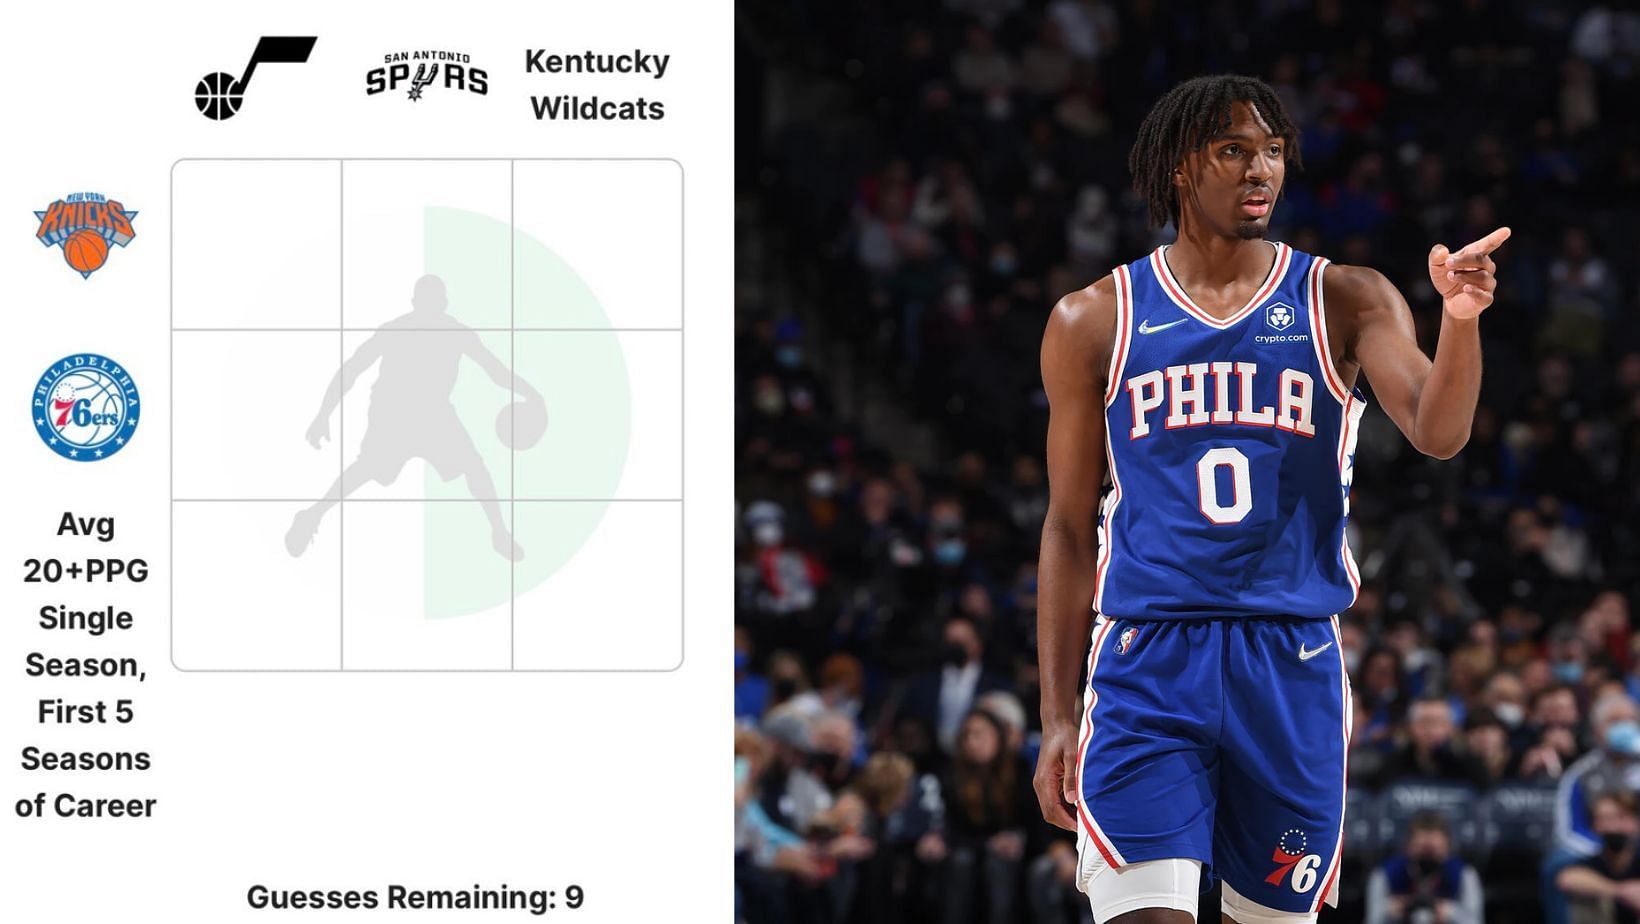 The July 26 NBA Crossover Grid has been released.